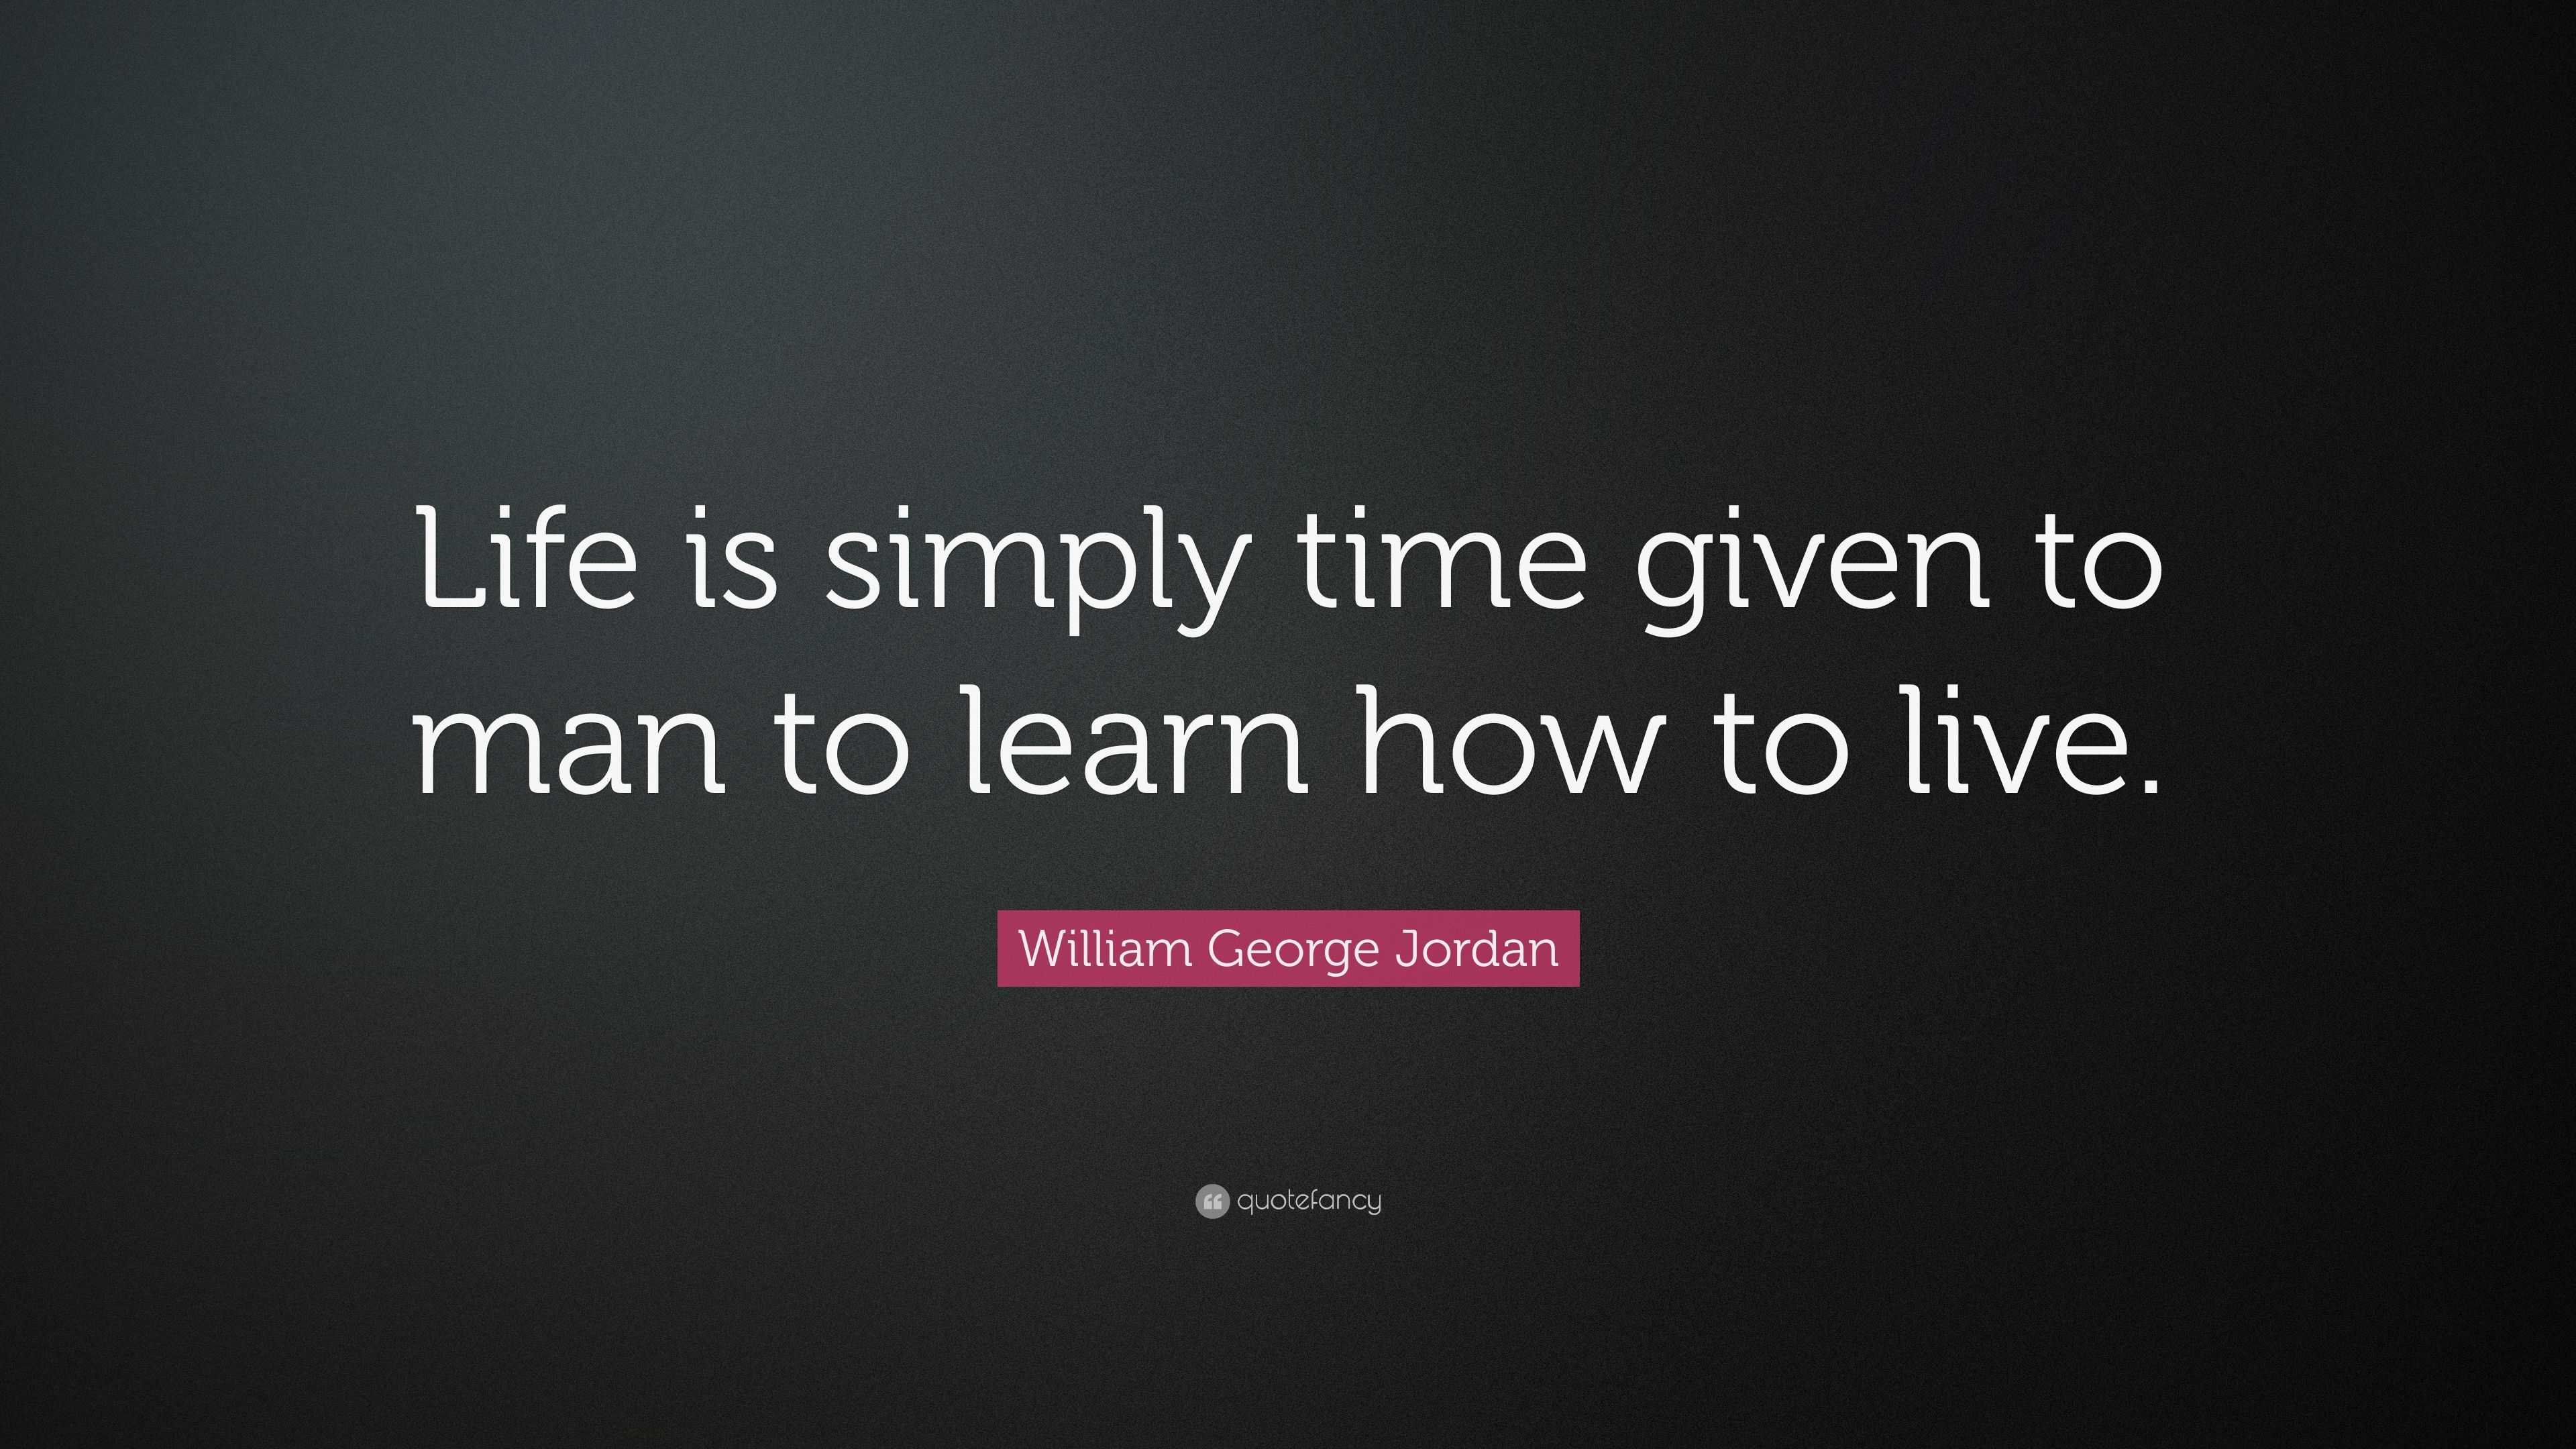 William George Jordan Quote: “Life is simply time given to man to learn ...